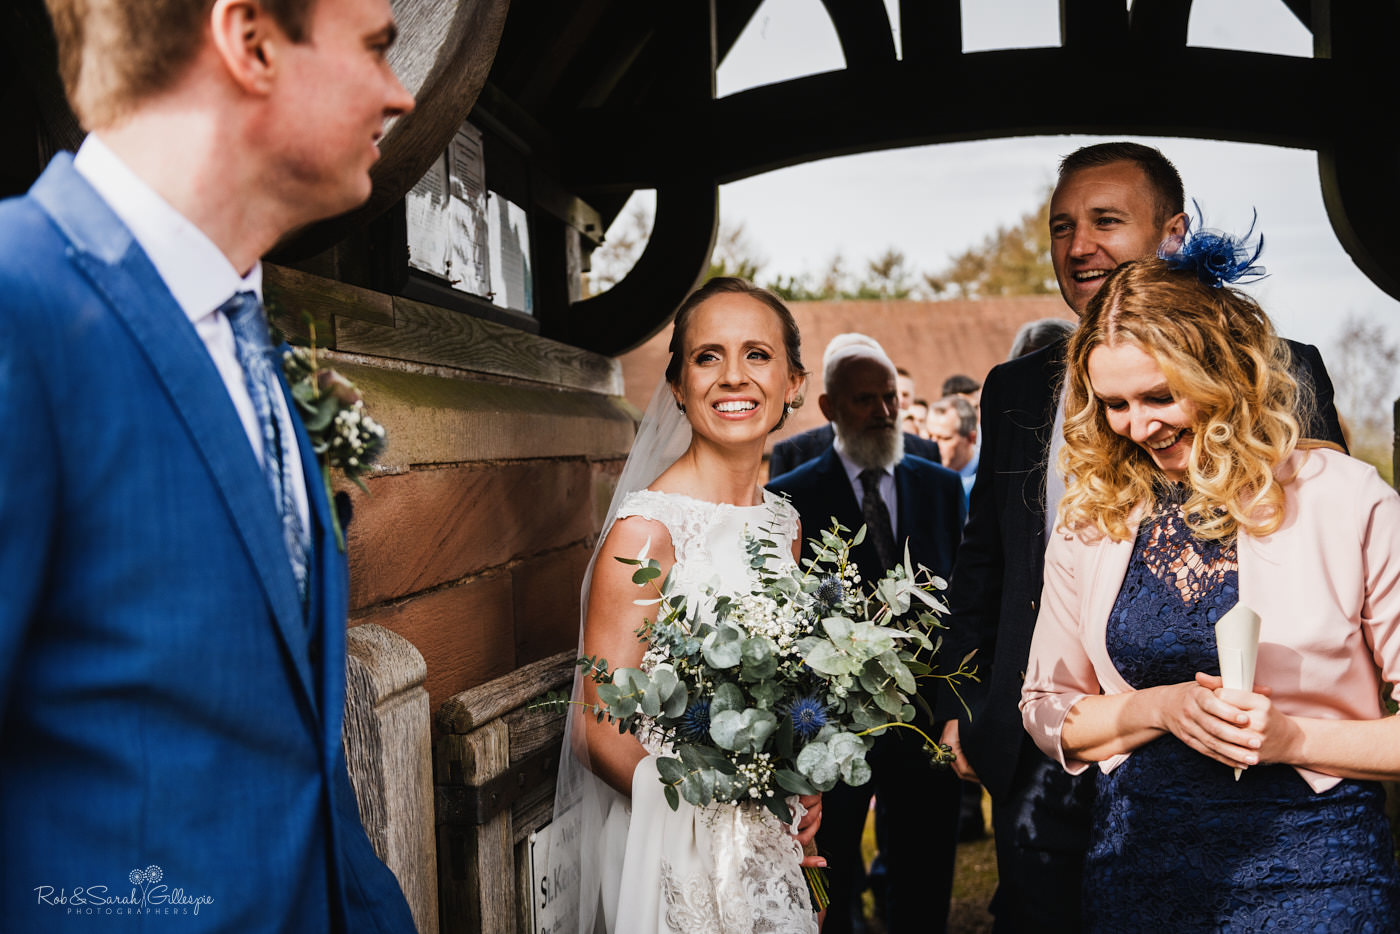 Wedding guests congratulate bride and groom at St Kenelm's church in Worcestershire